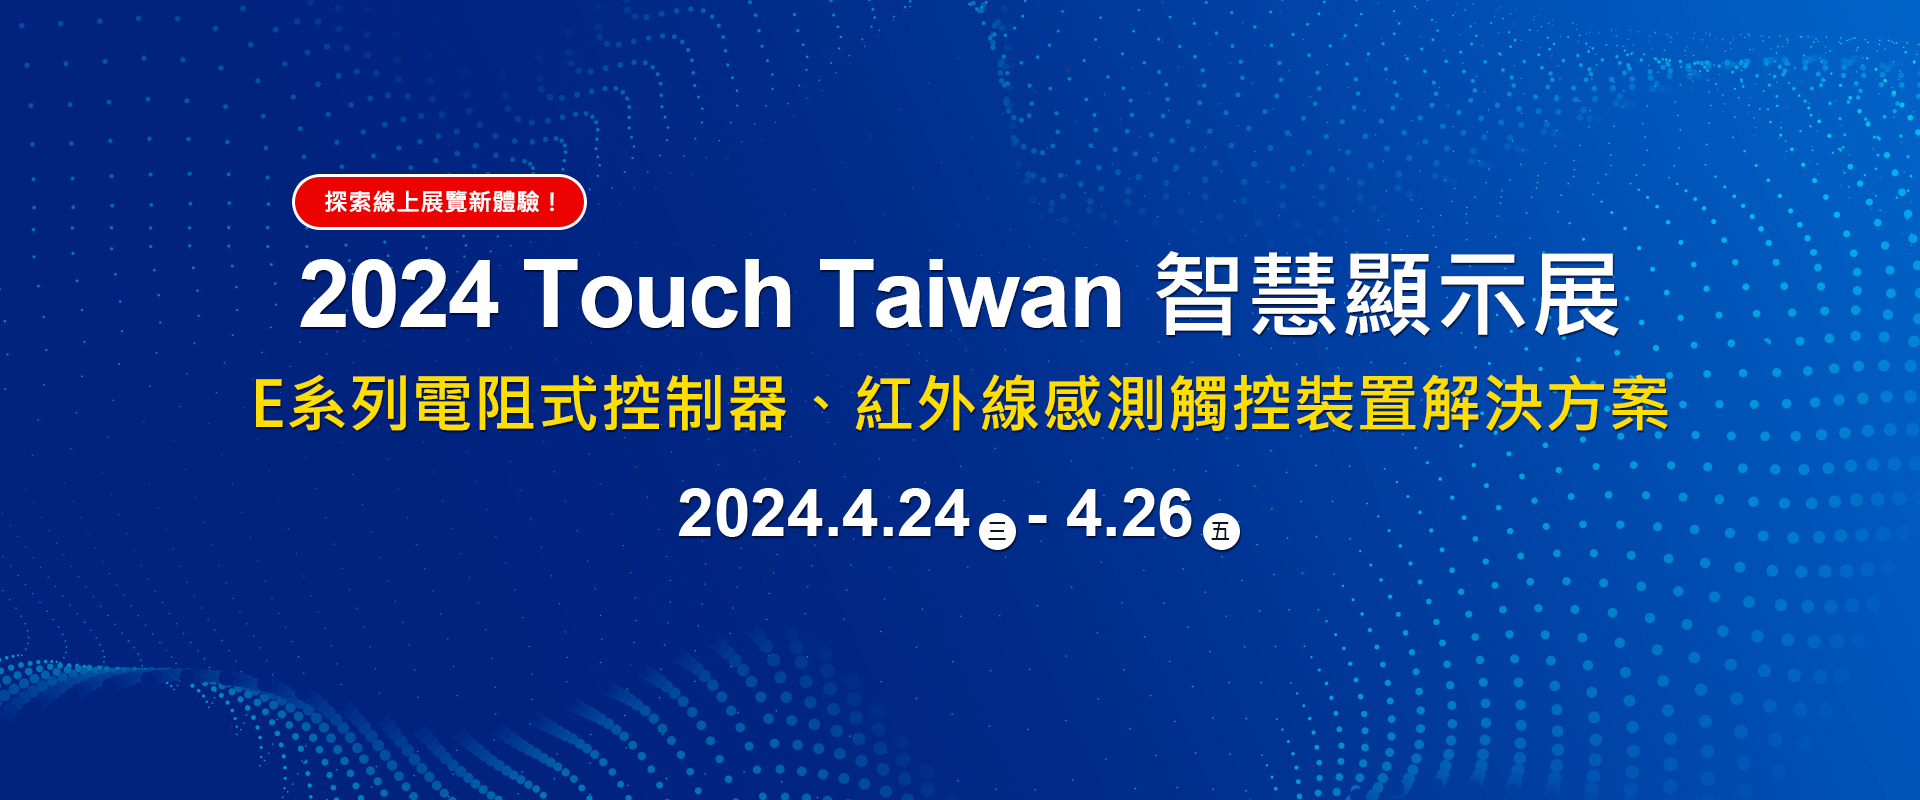 2024 Touch Taiwan 智慧顯示展